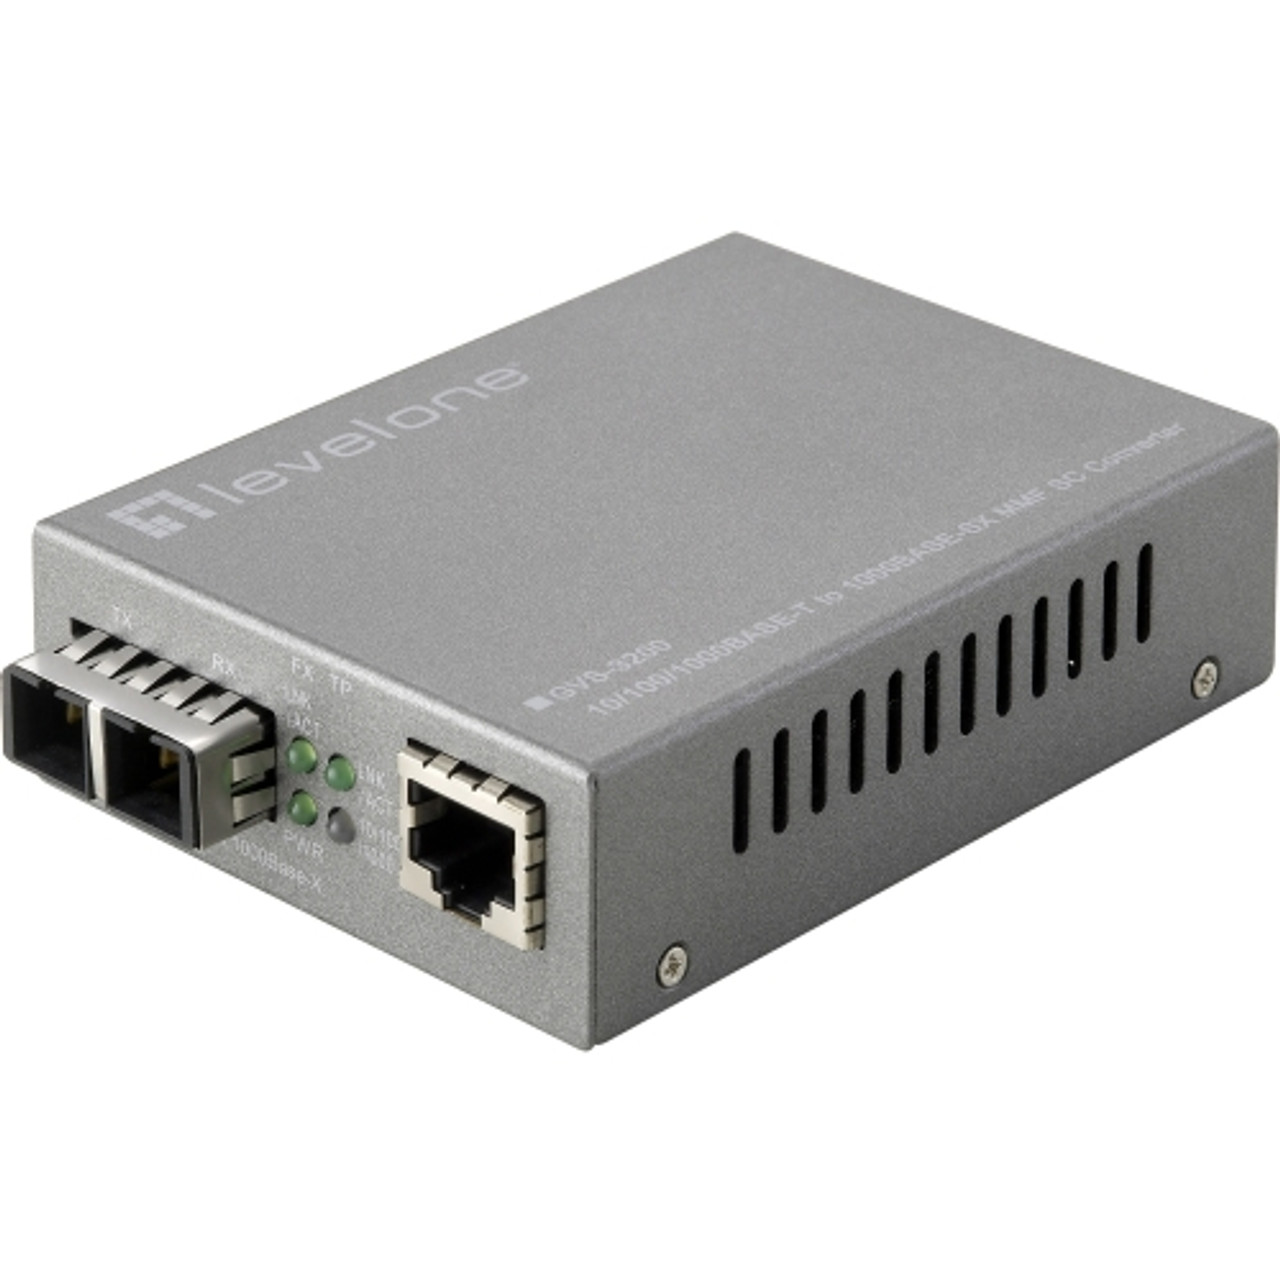 GVS-3200 LevelOne Web Smart 10/100/1000 Based-T to 1000SX MMF SC Media Converter, 550M Web Smart Media converter, 10/100/1000 Based-T to 1000SX MMF SC